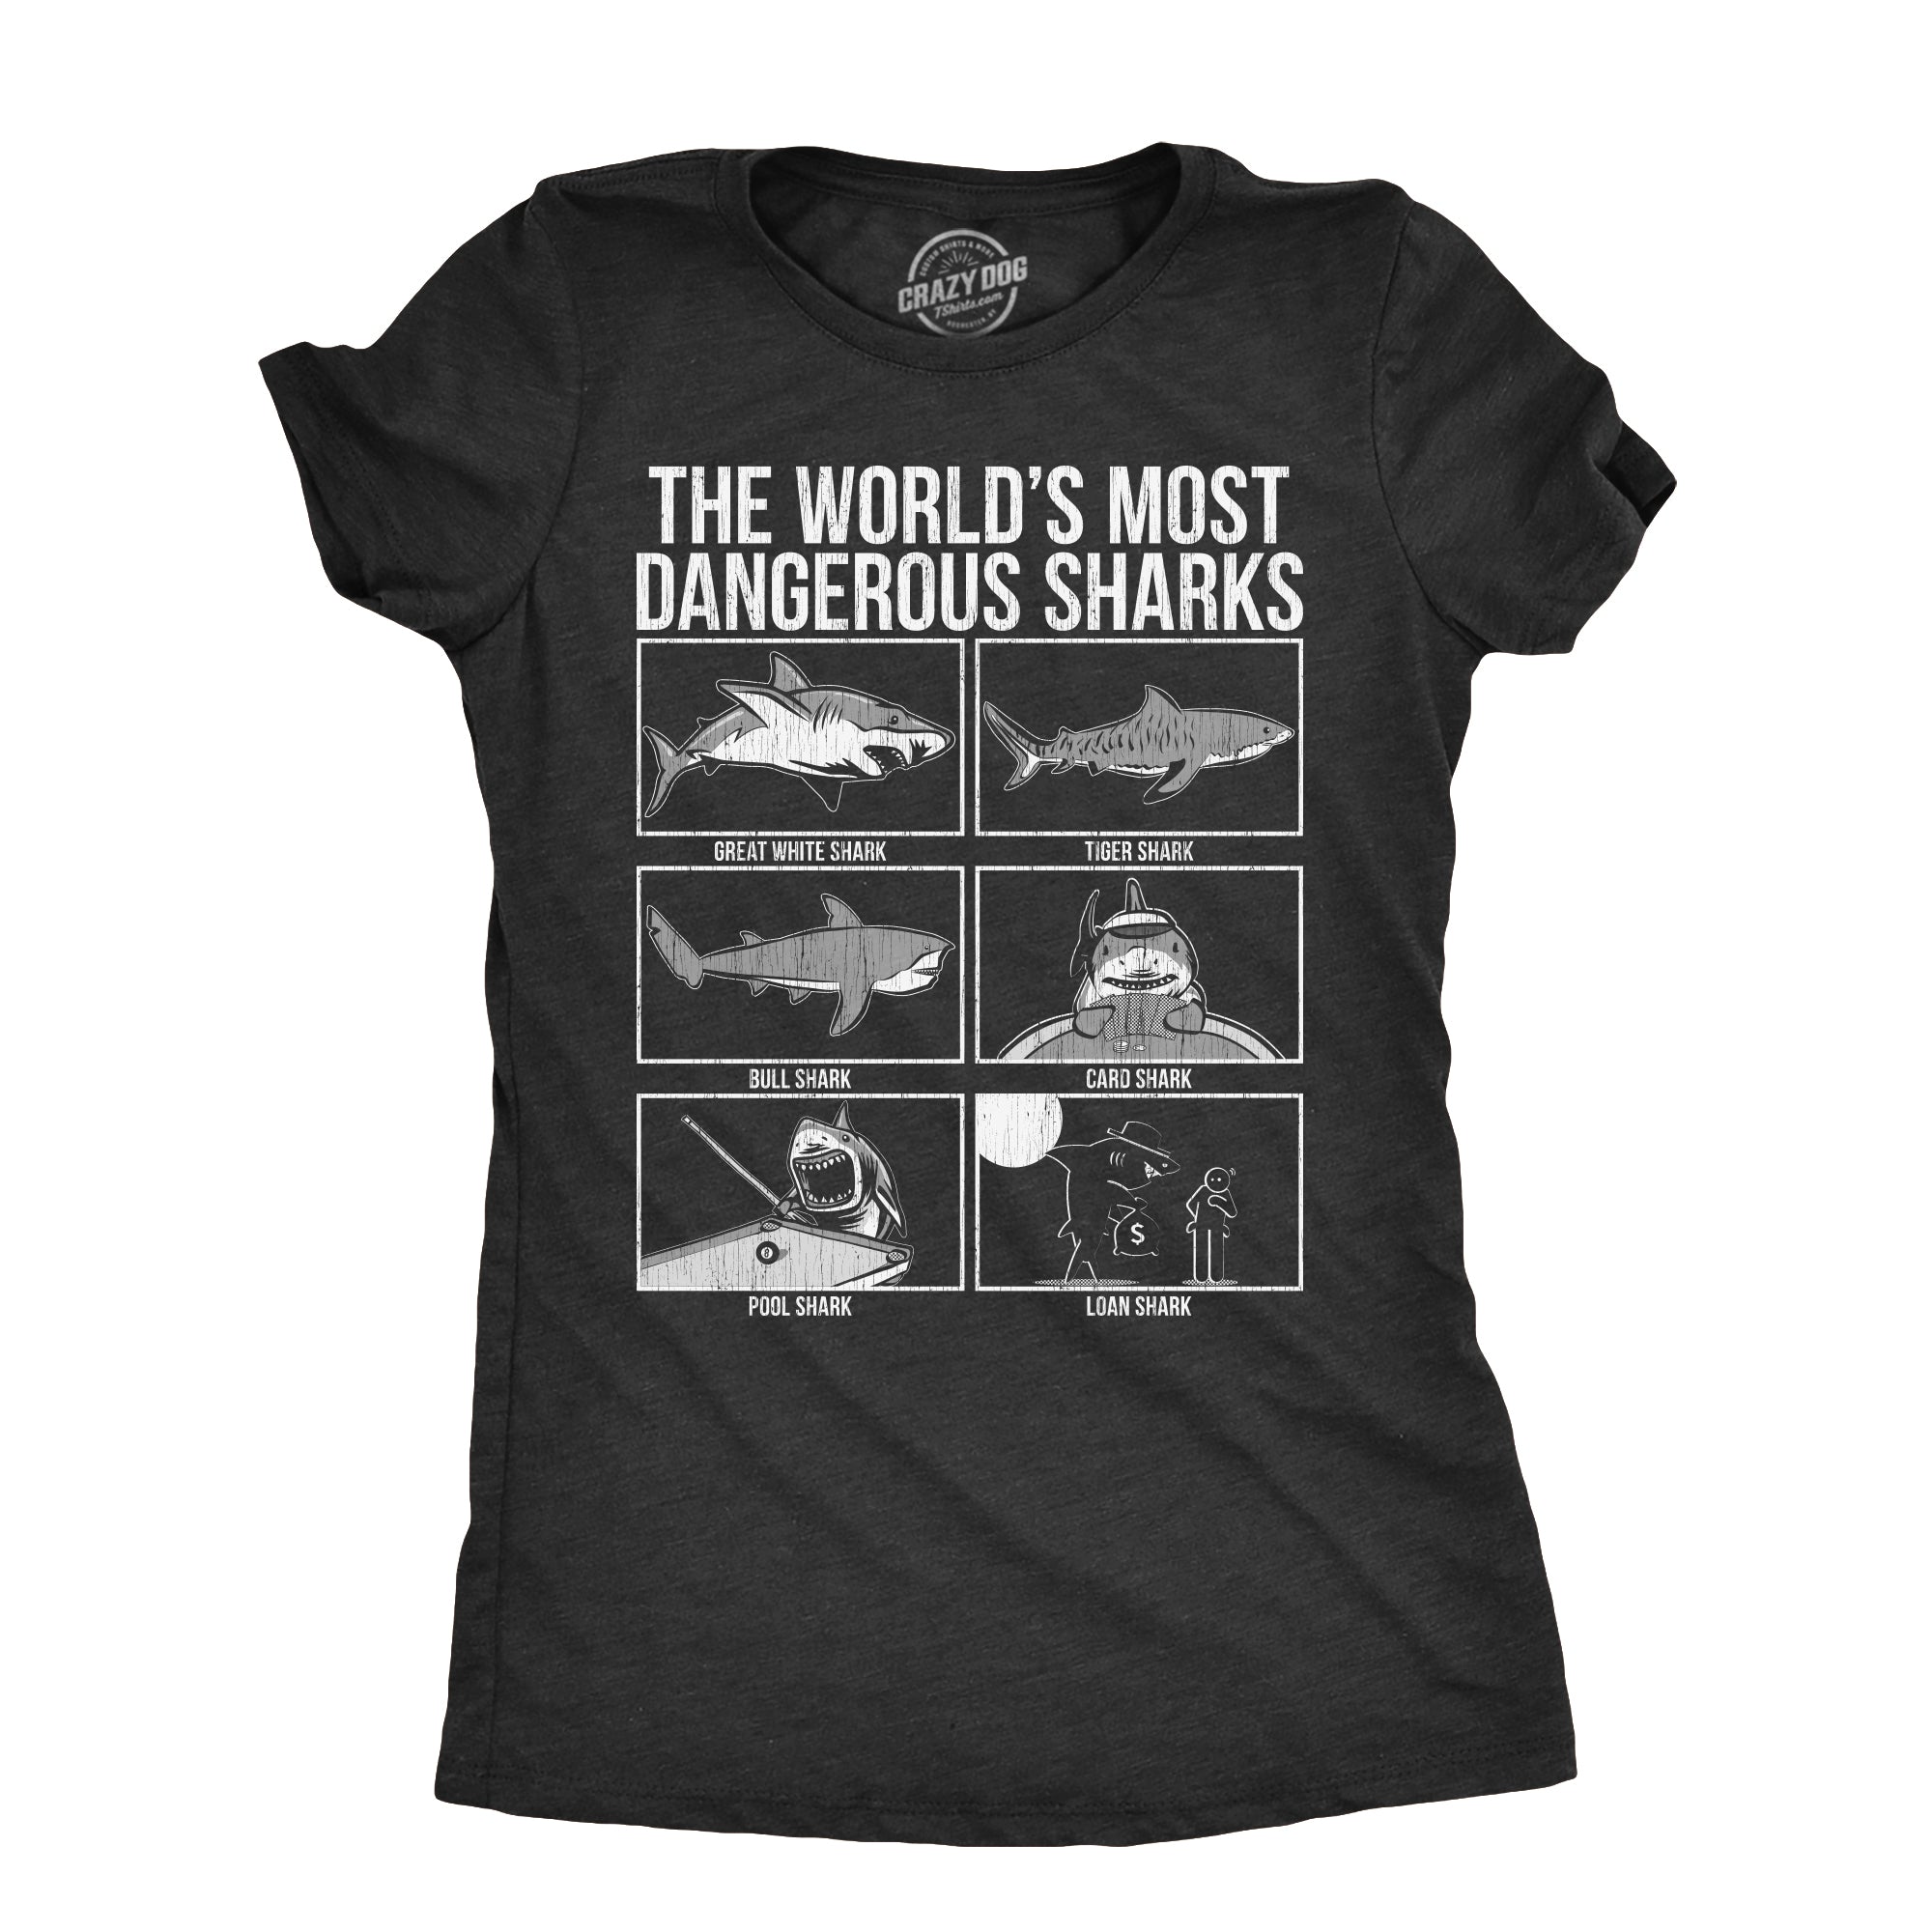 Funny Heather Black - SHARKS The Worlds Most Dangerous Sharks Womens T Shirt Nerdy Animal sarcastic Tee